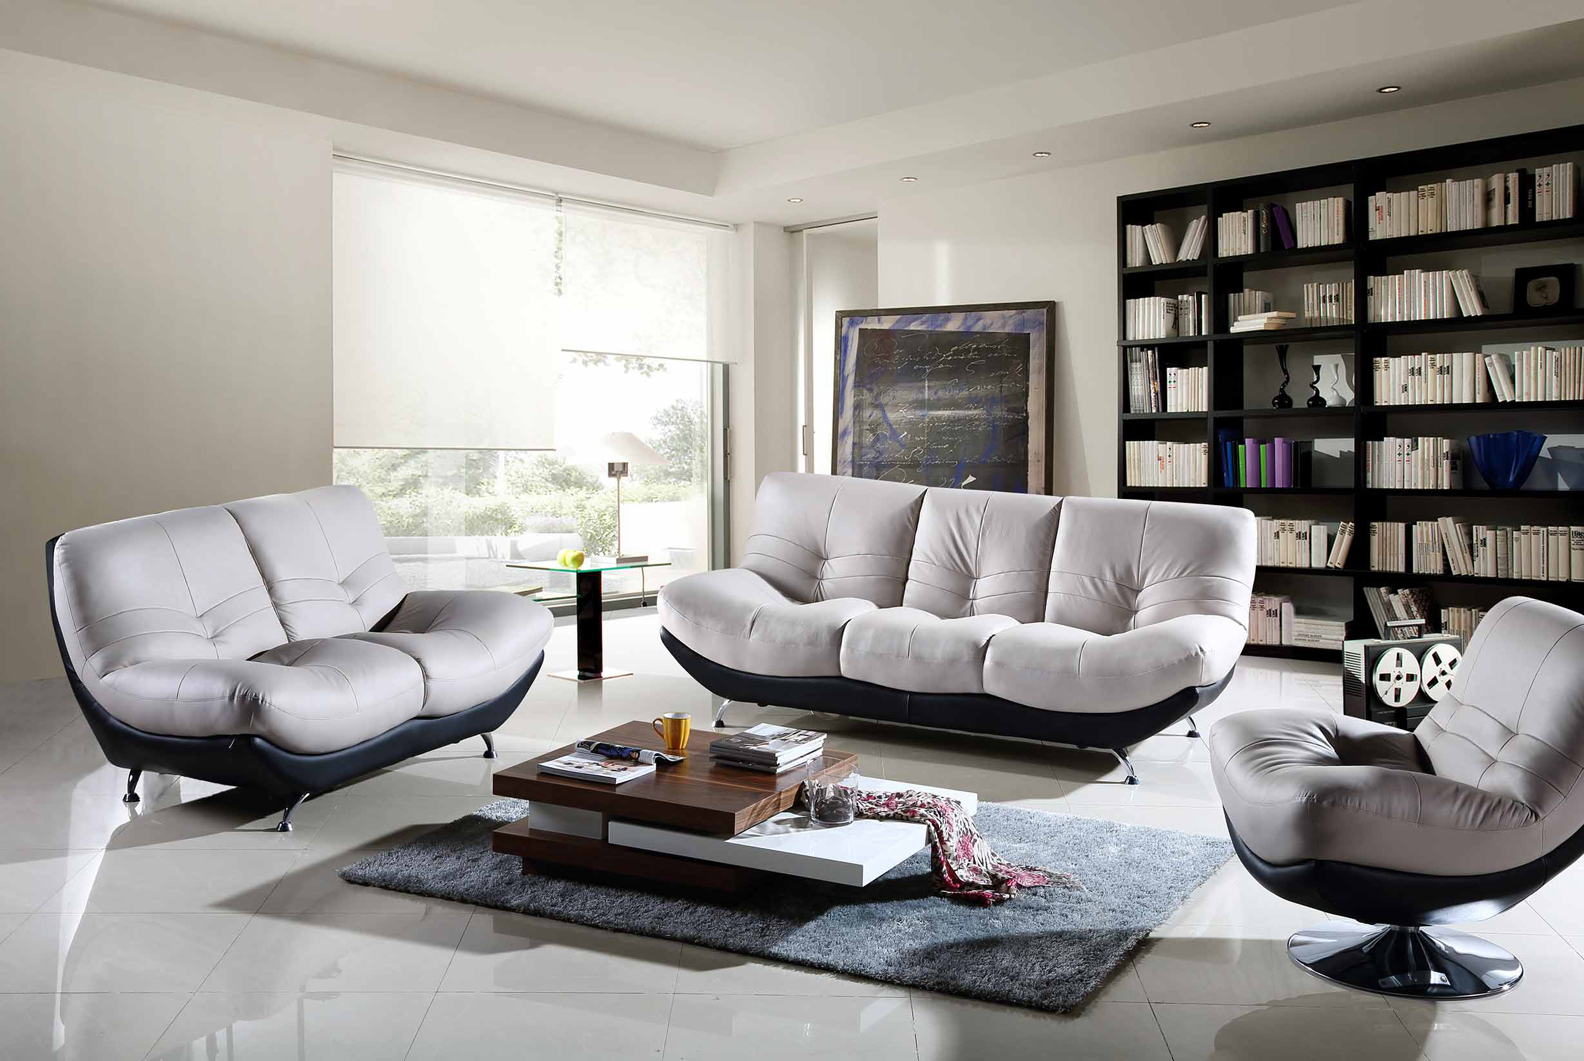 70 Living room design ideas to create an appealing atmosphere